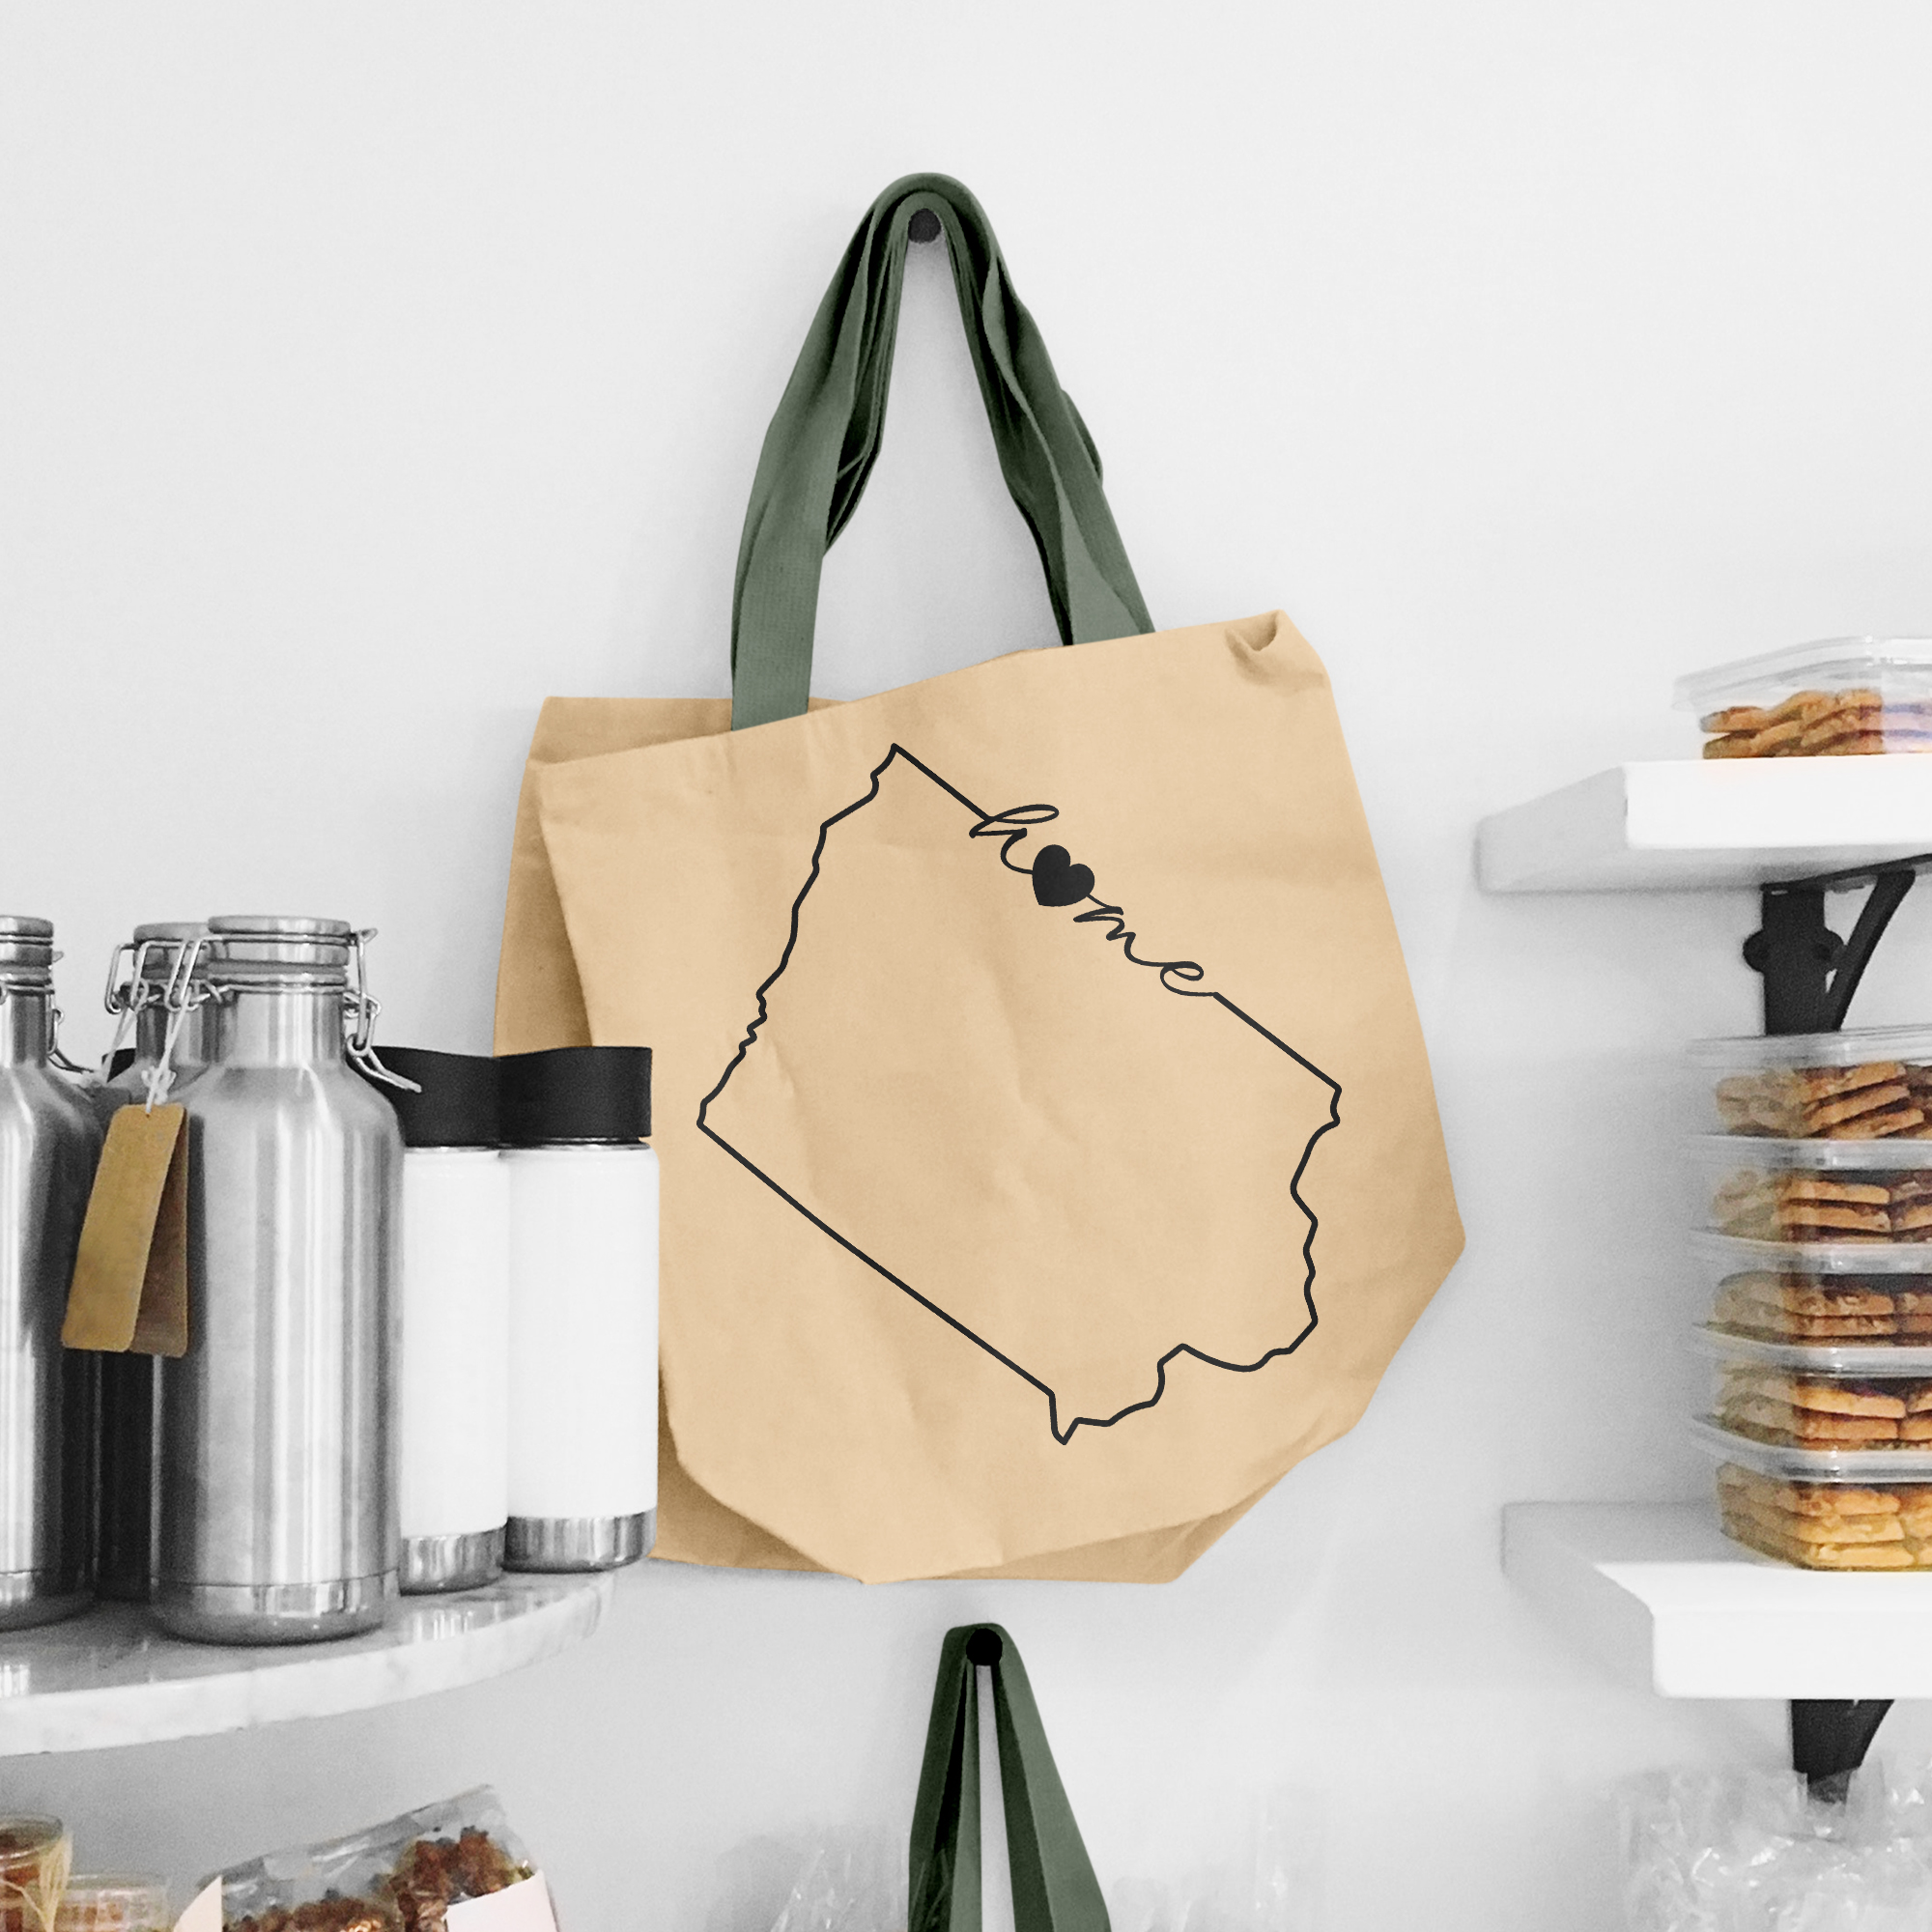 Black illustration of home on the beige shopping bag with dirty green handle.